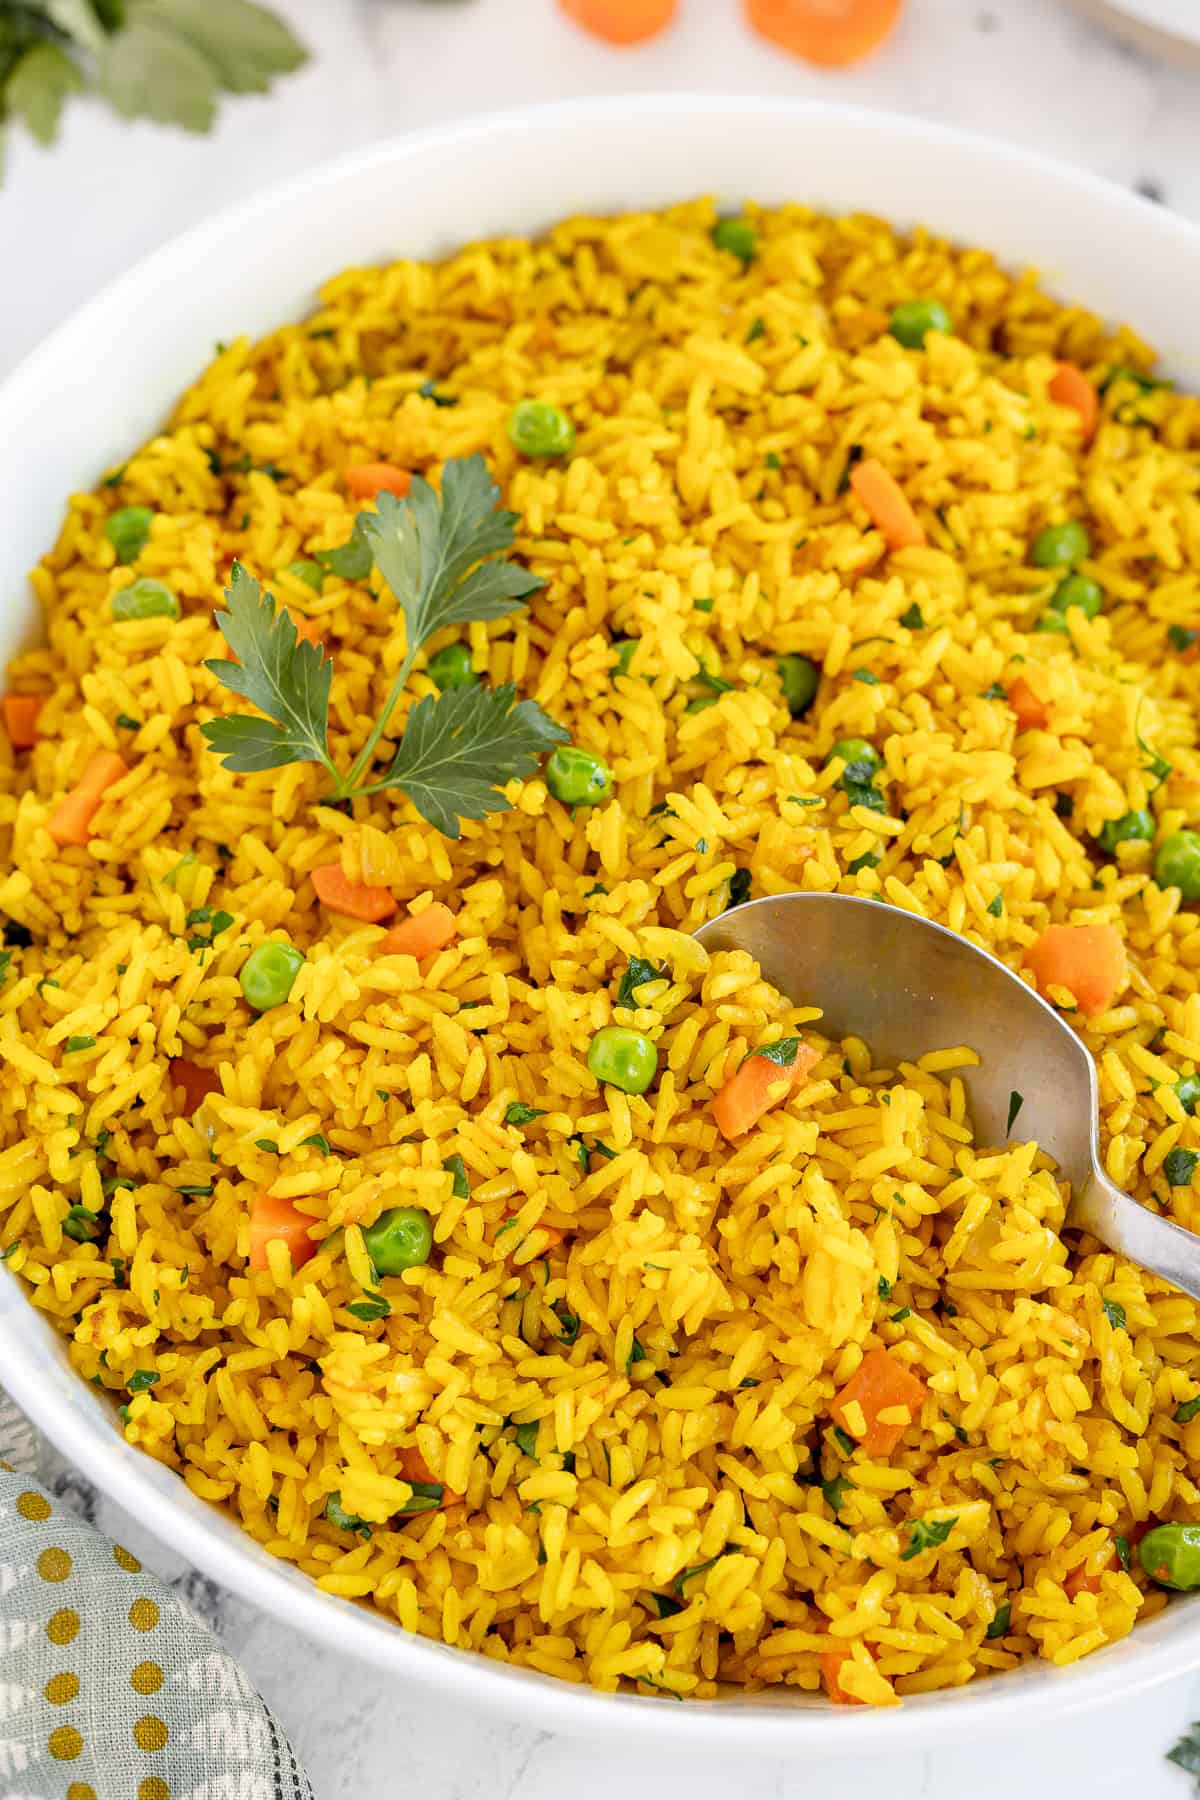 A spoon resting in a bowl of Yellow Rice with carrots and peas.